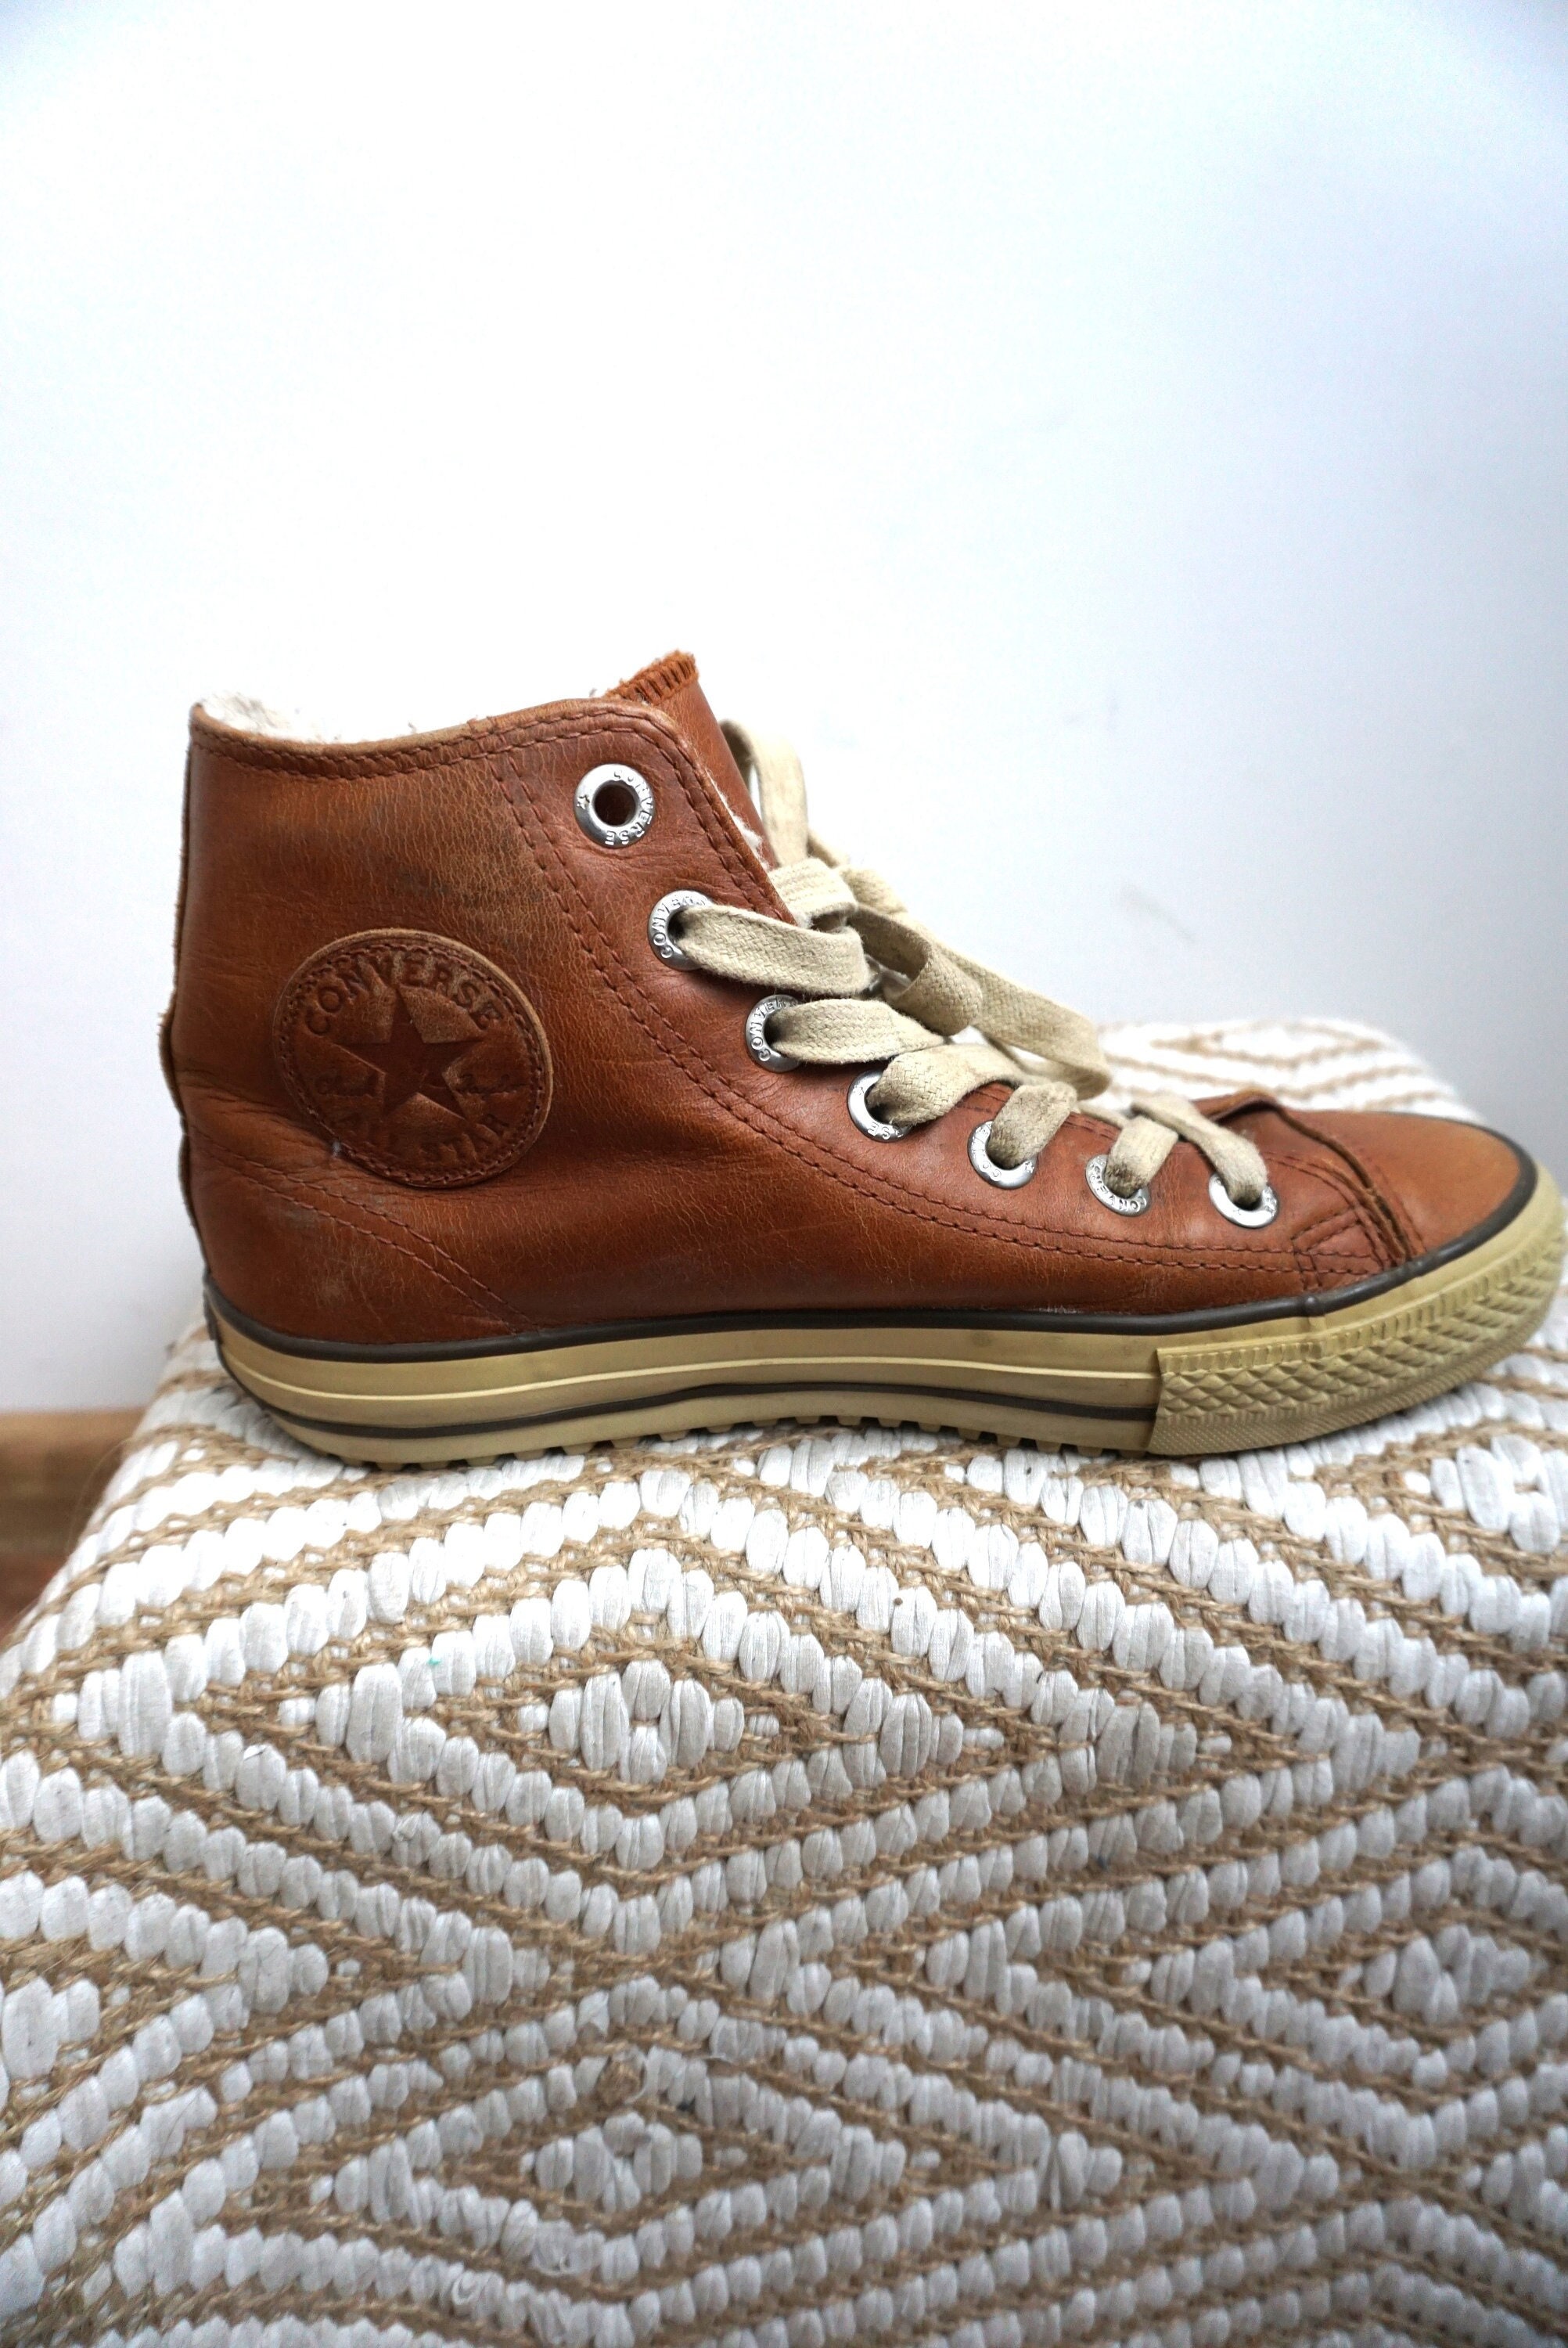 lineal Se convierte en Componer Buy Vintage Brown Leather Converse Boots / Sneakers / Warm Inside/ Online  in India - Etsy